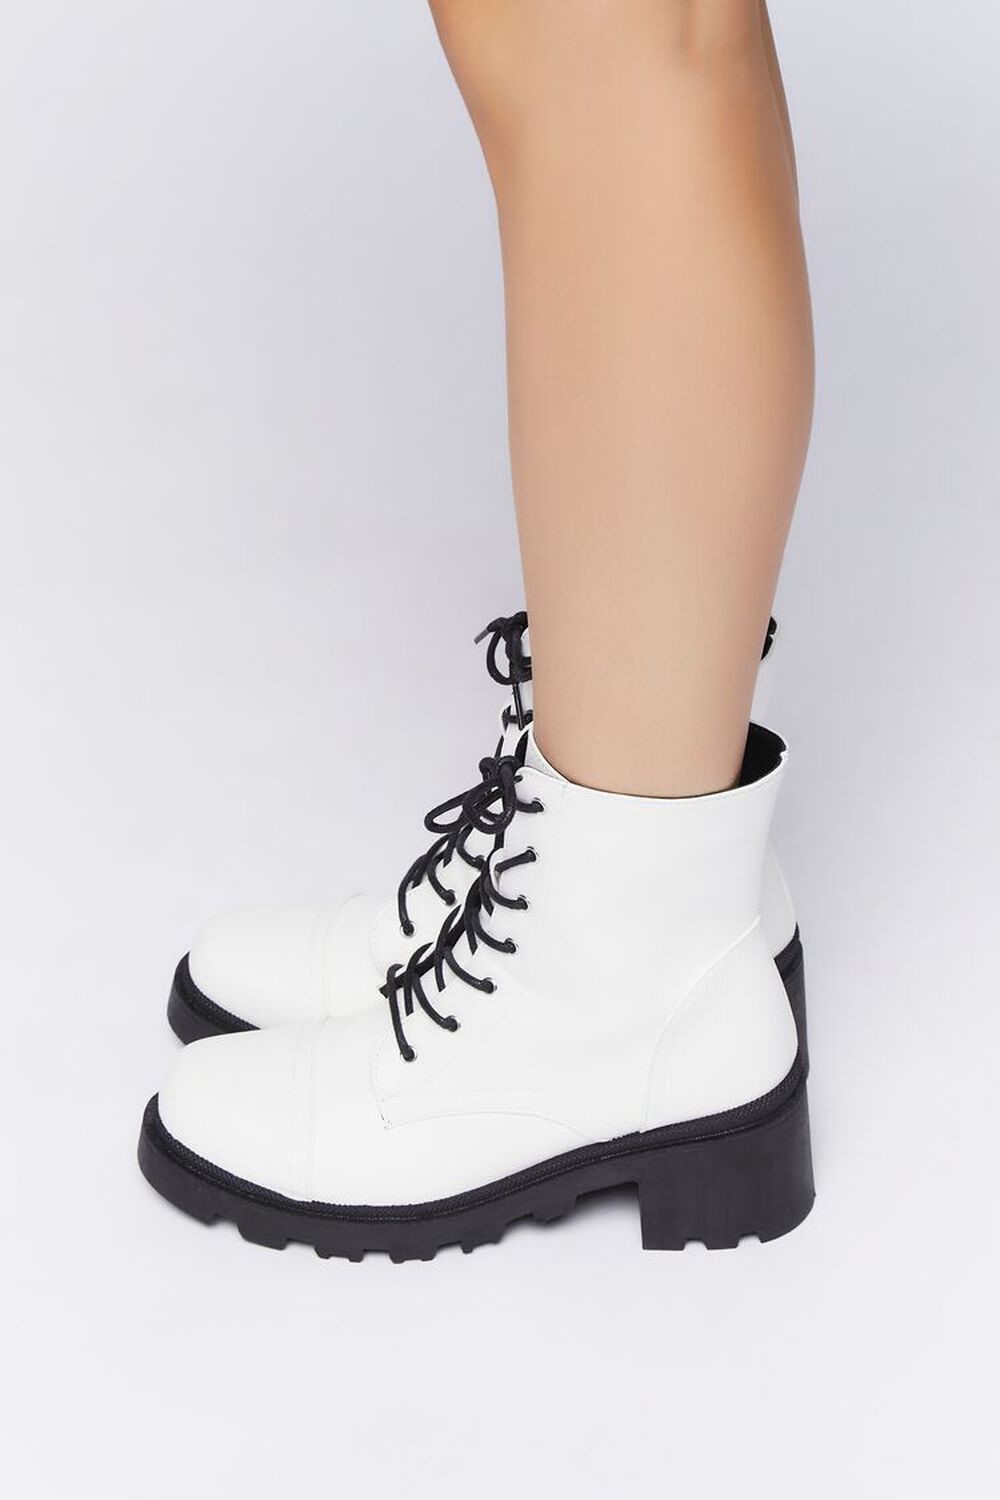 WHITE Faux Leather Combat Boots, image 2